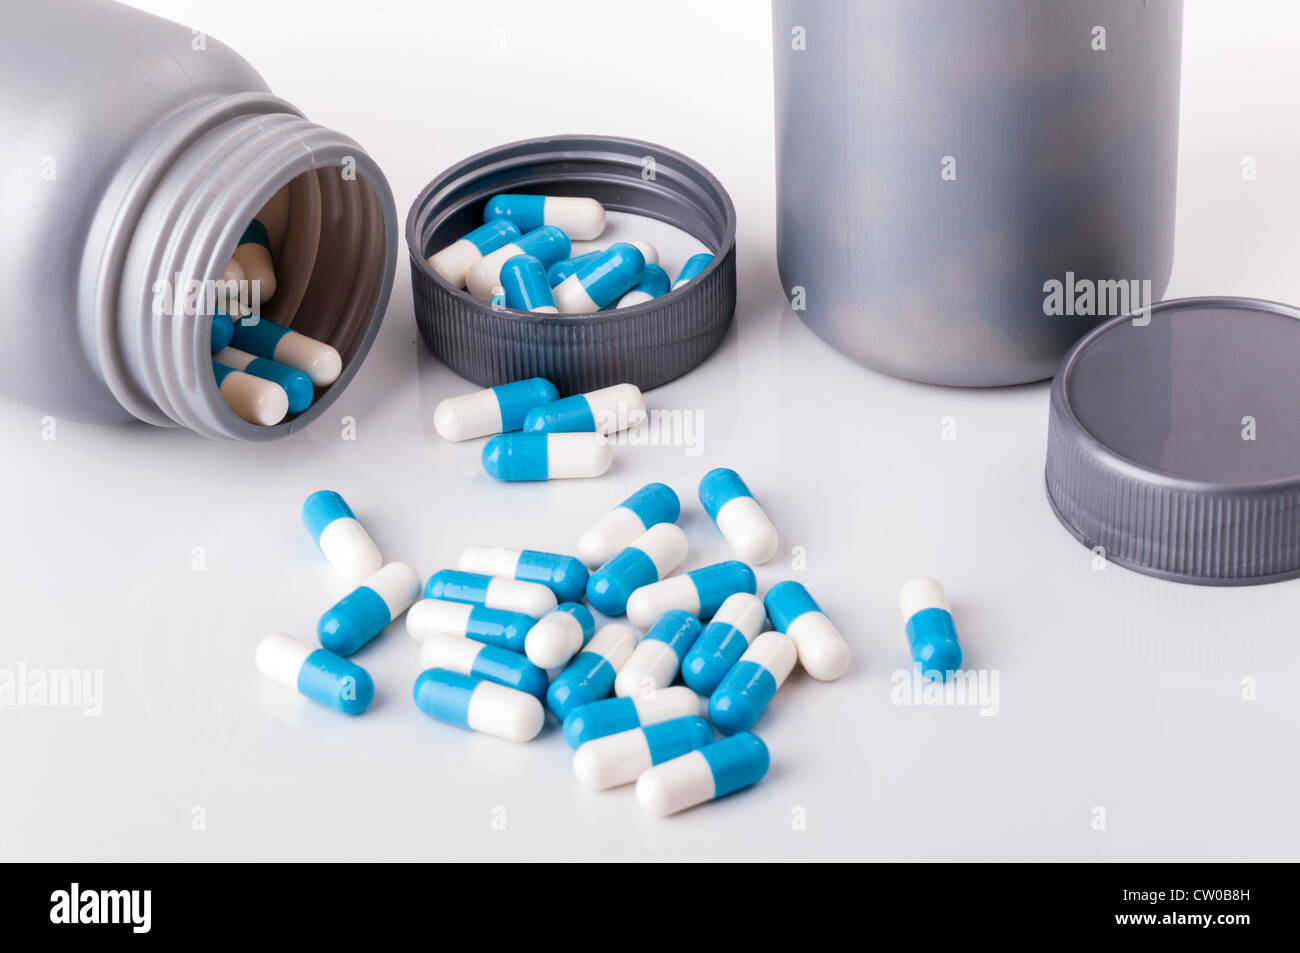 open container with medicament in tablet form Stock Photo